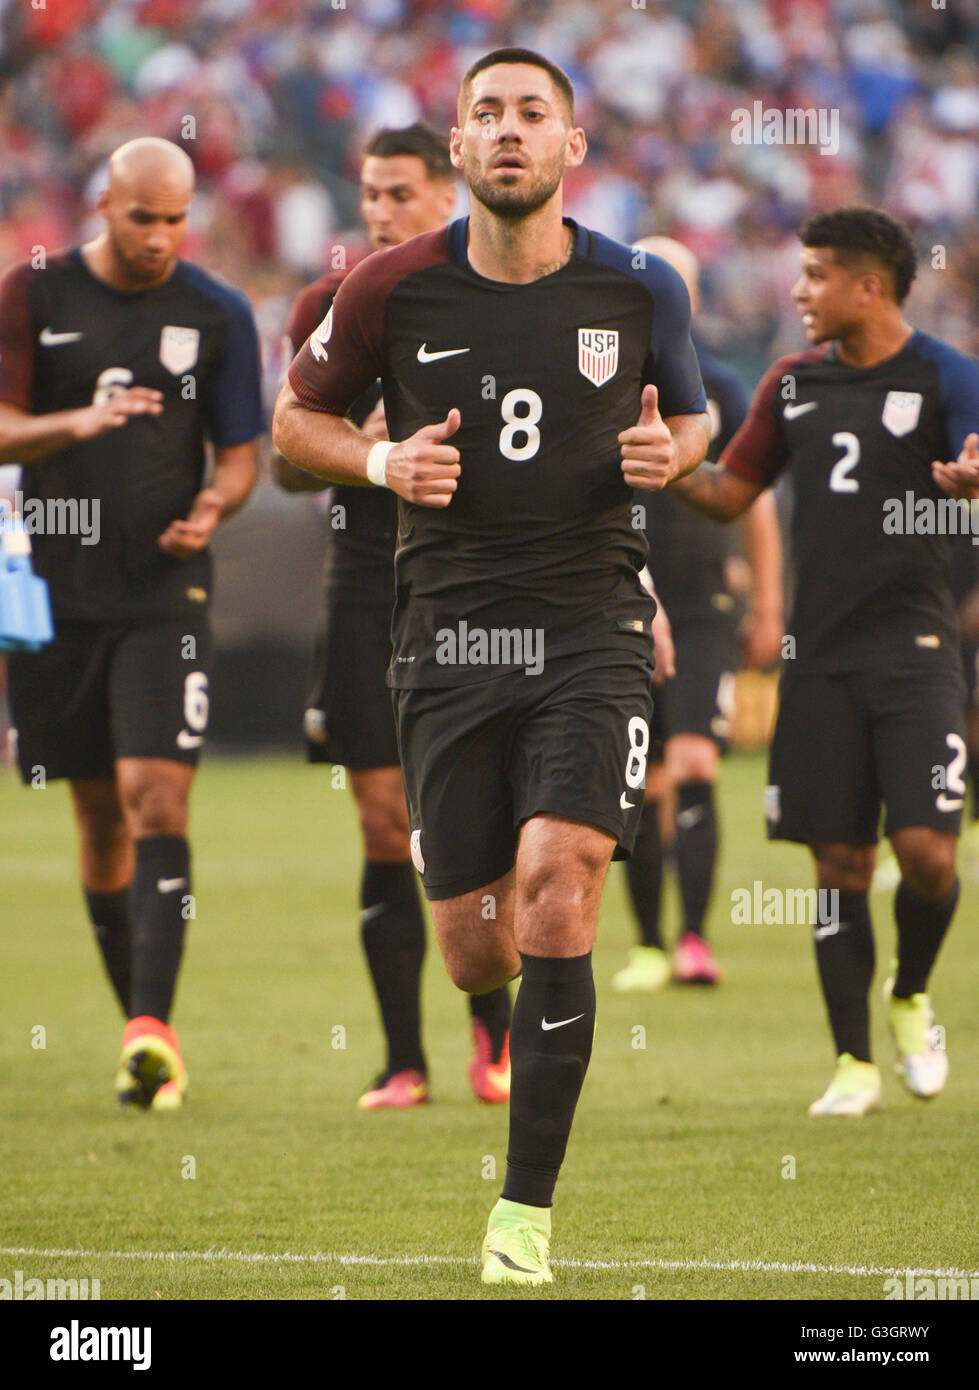 Philadelphia, Pennsylvania, USA. 11th June, 2016. CLINT DEMPSEY and DEANDRE YEDLIN of the USA walk off of the pitch during the Copa America match played at Lincoln Financial Field in Philadelphia Pa © Ricky Fitchett/ZUMA Wire/Alamy Live News Stock Photo